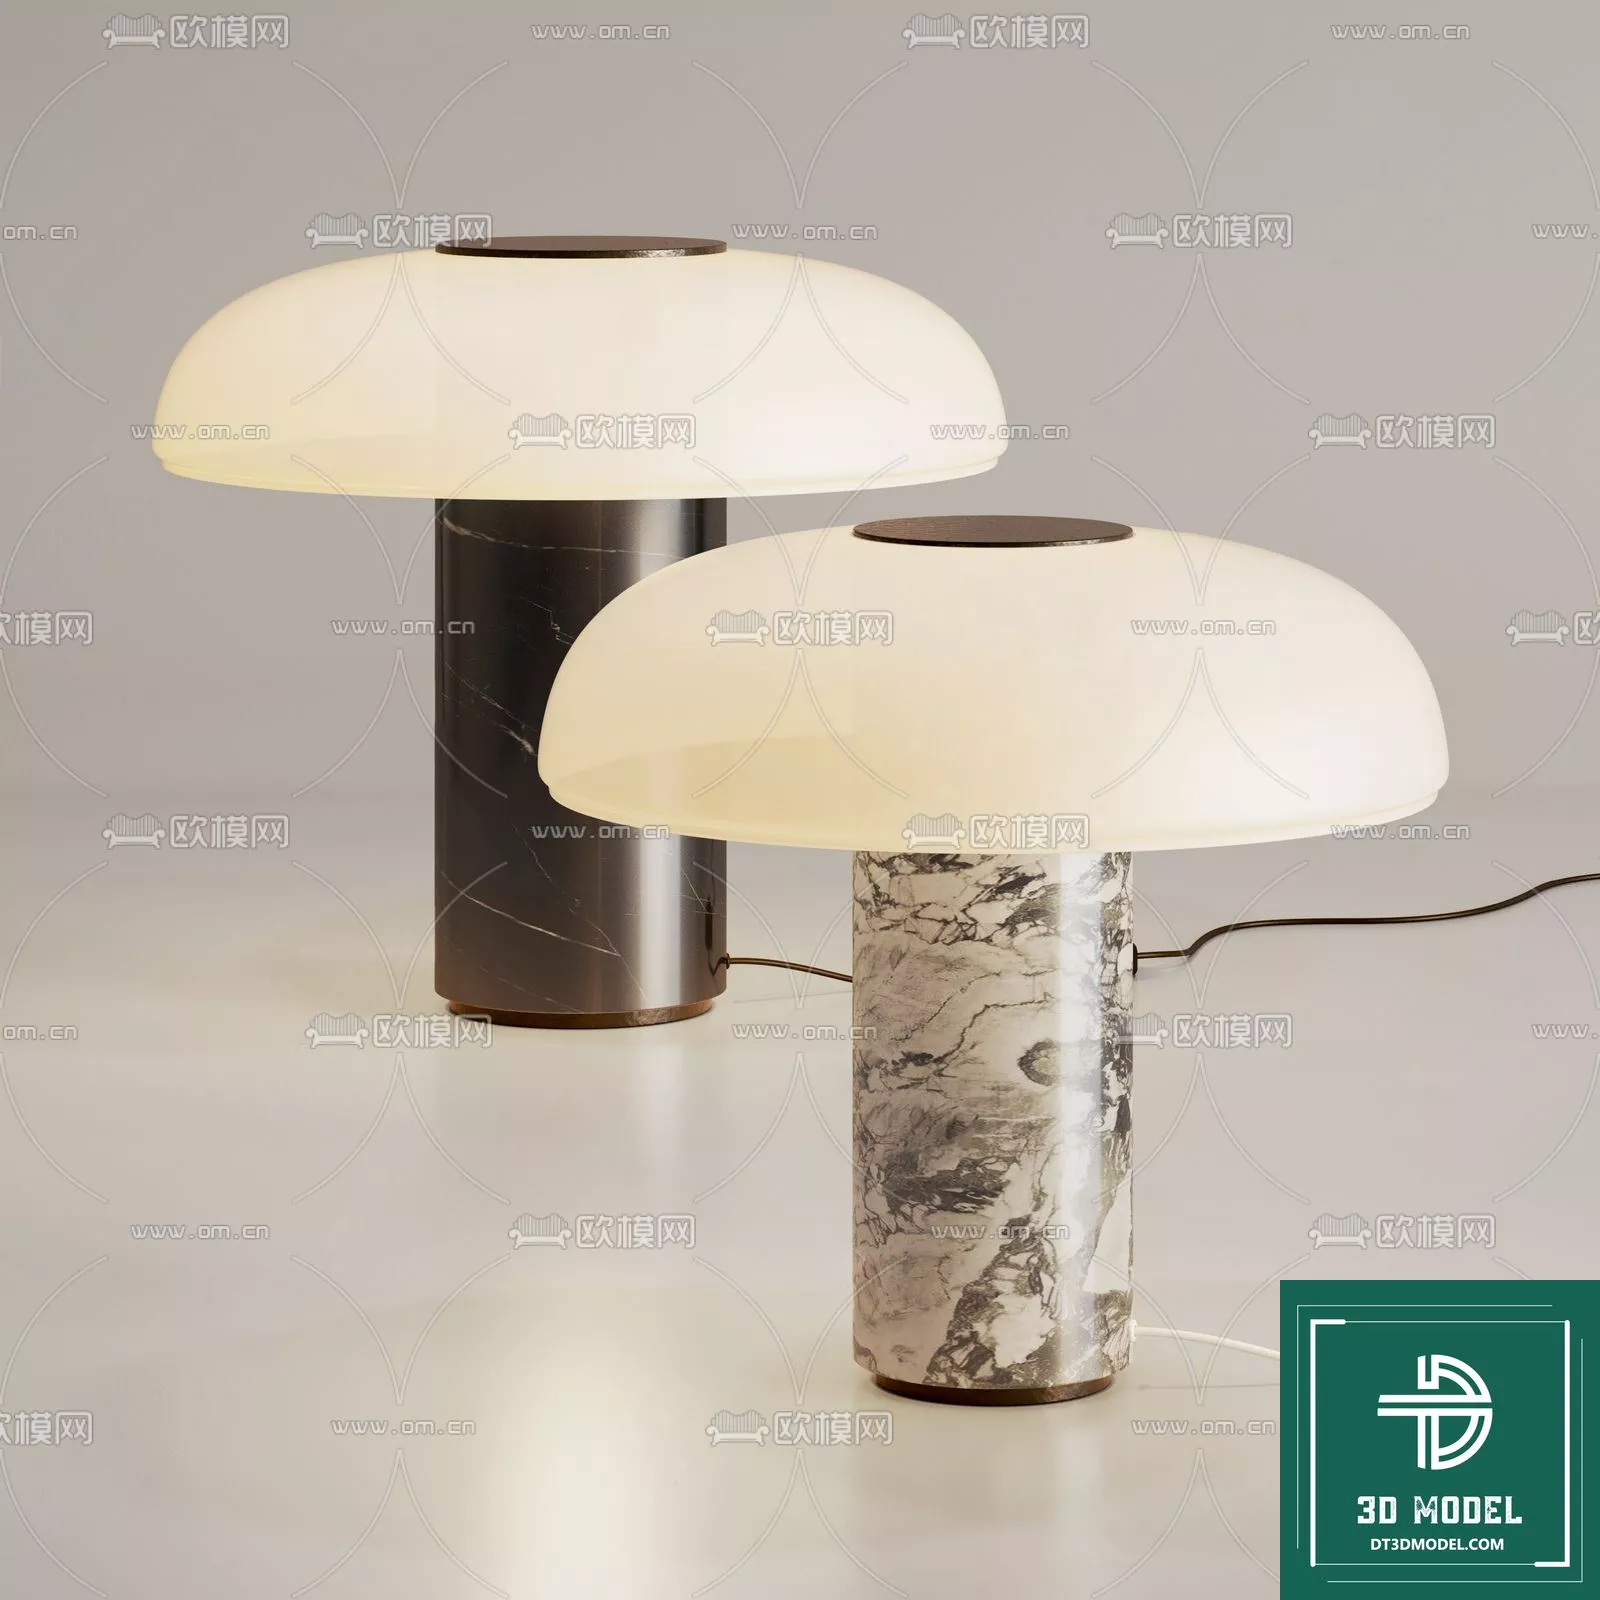 MODERN TABLE LAMP - SKETCHUP 3D MODEL - VRAY OR ENSCAPE - ID14578